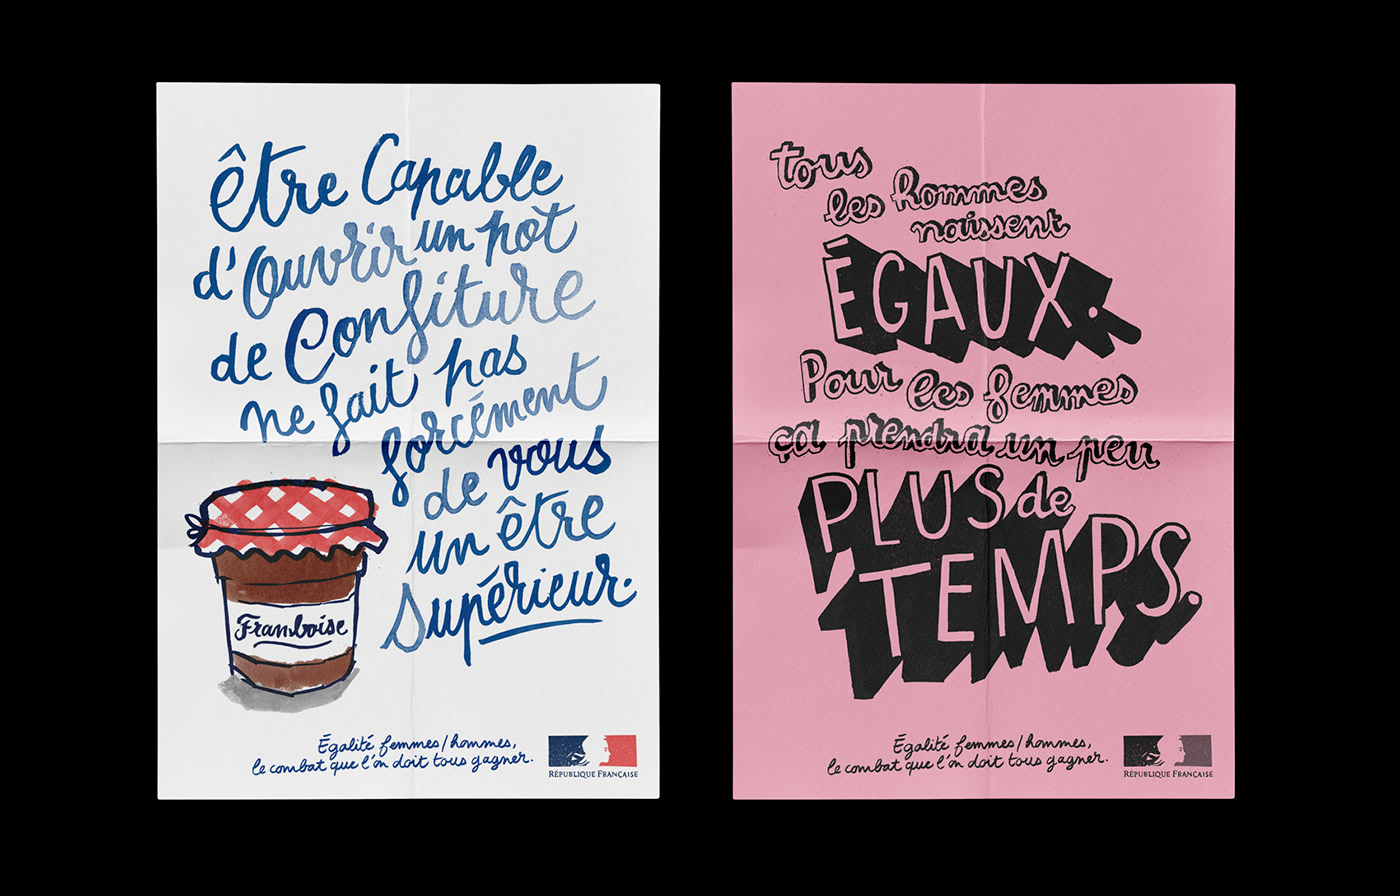 fight france Gender governmental lettering Parity posters social violence woman